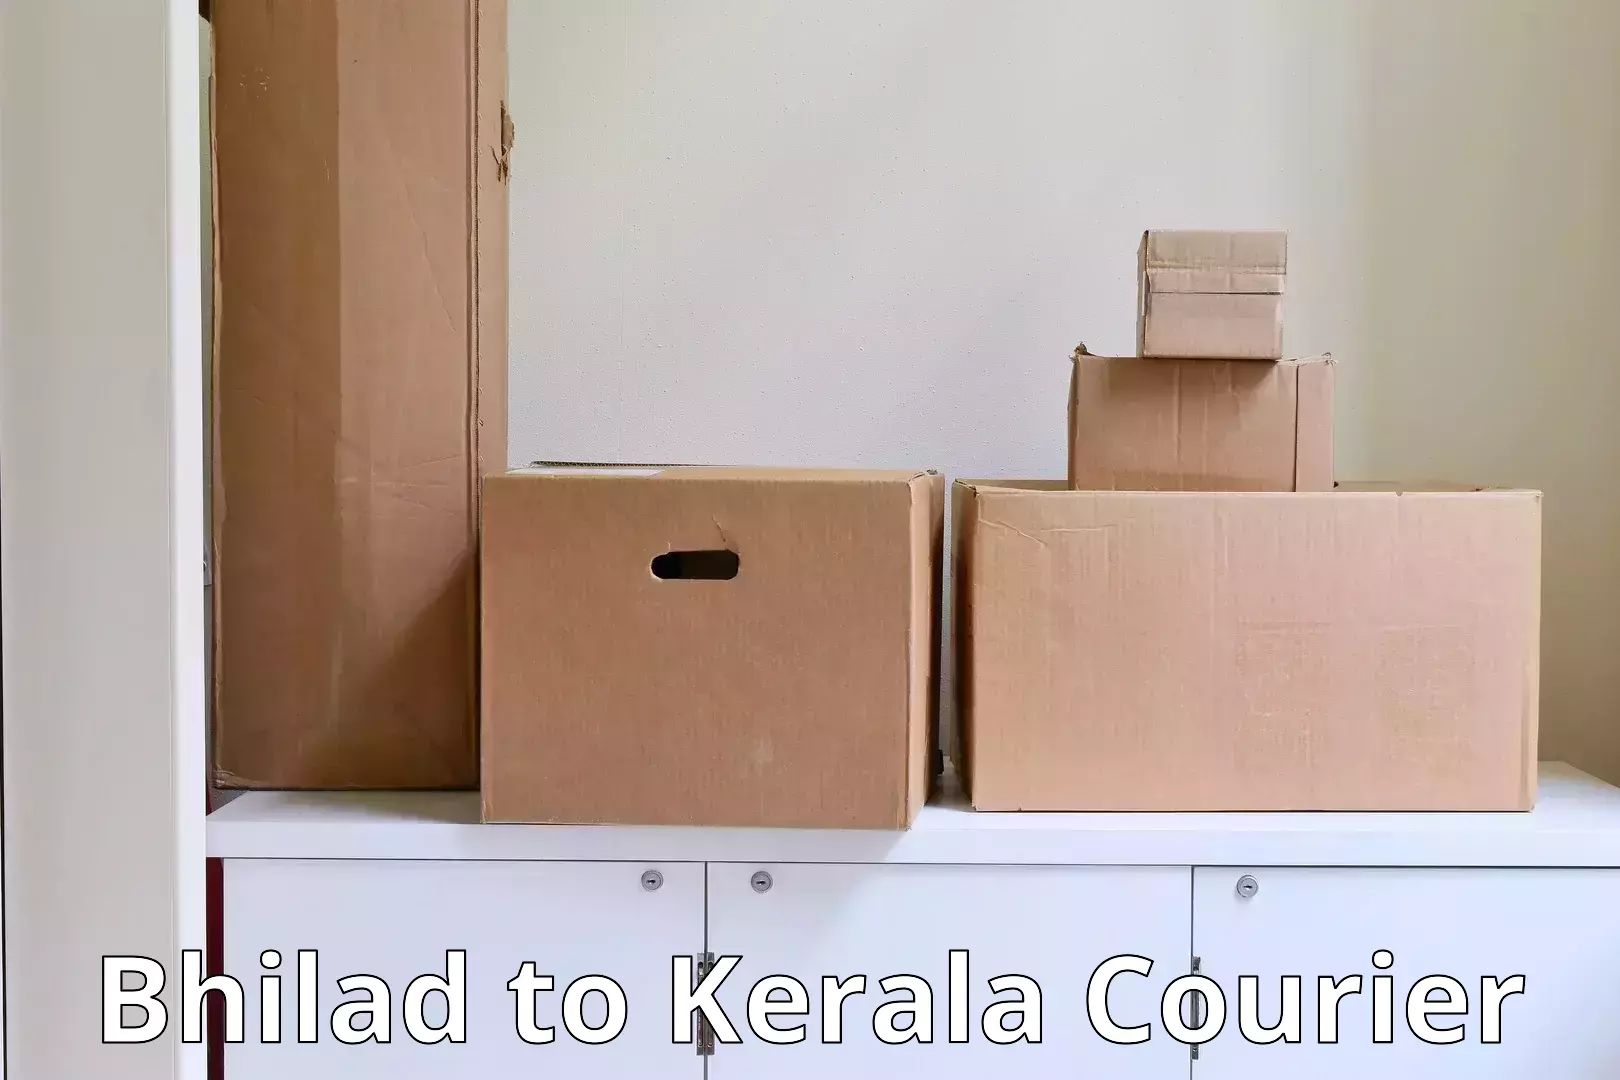 Moving and packing experts Bhilad to Kerala